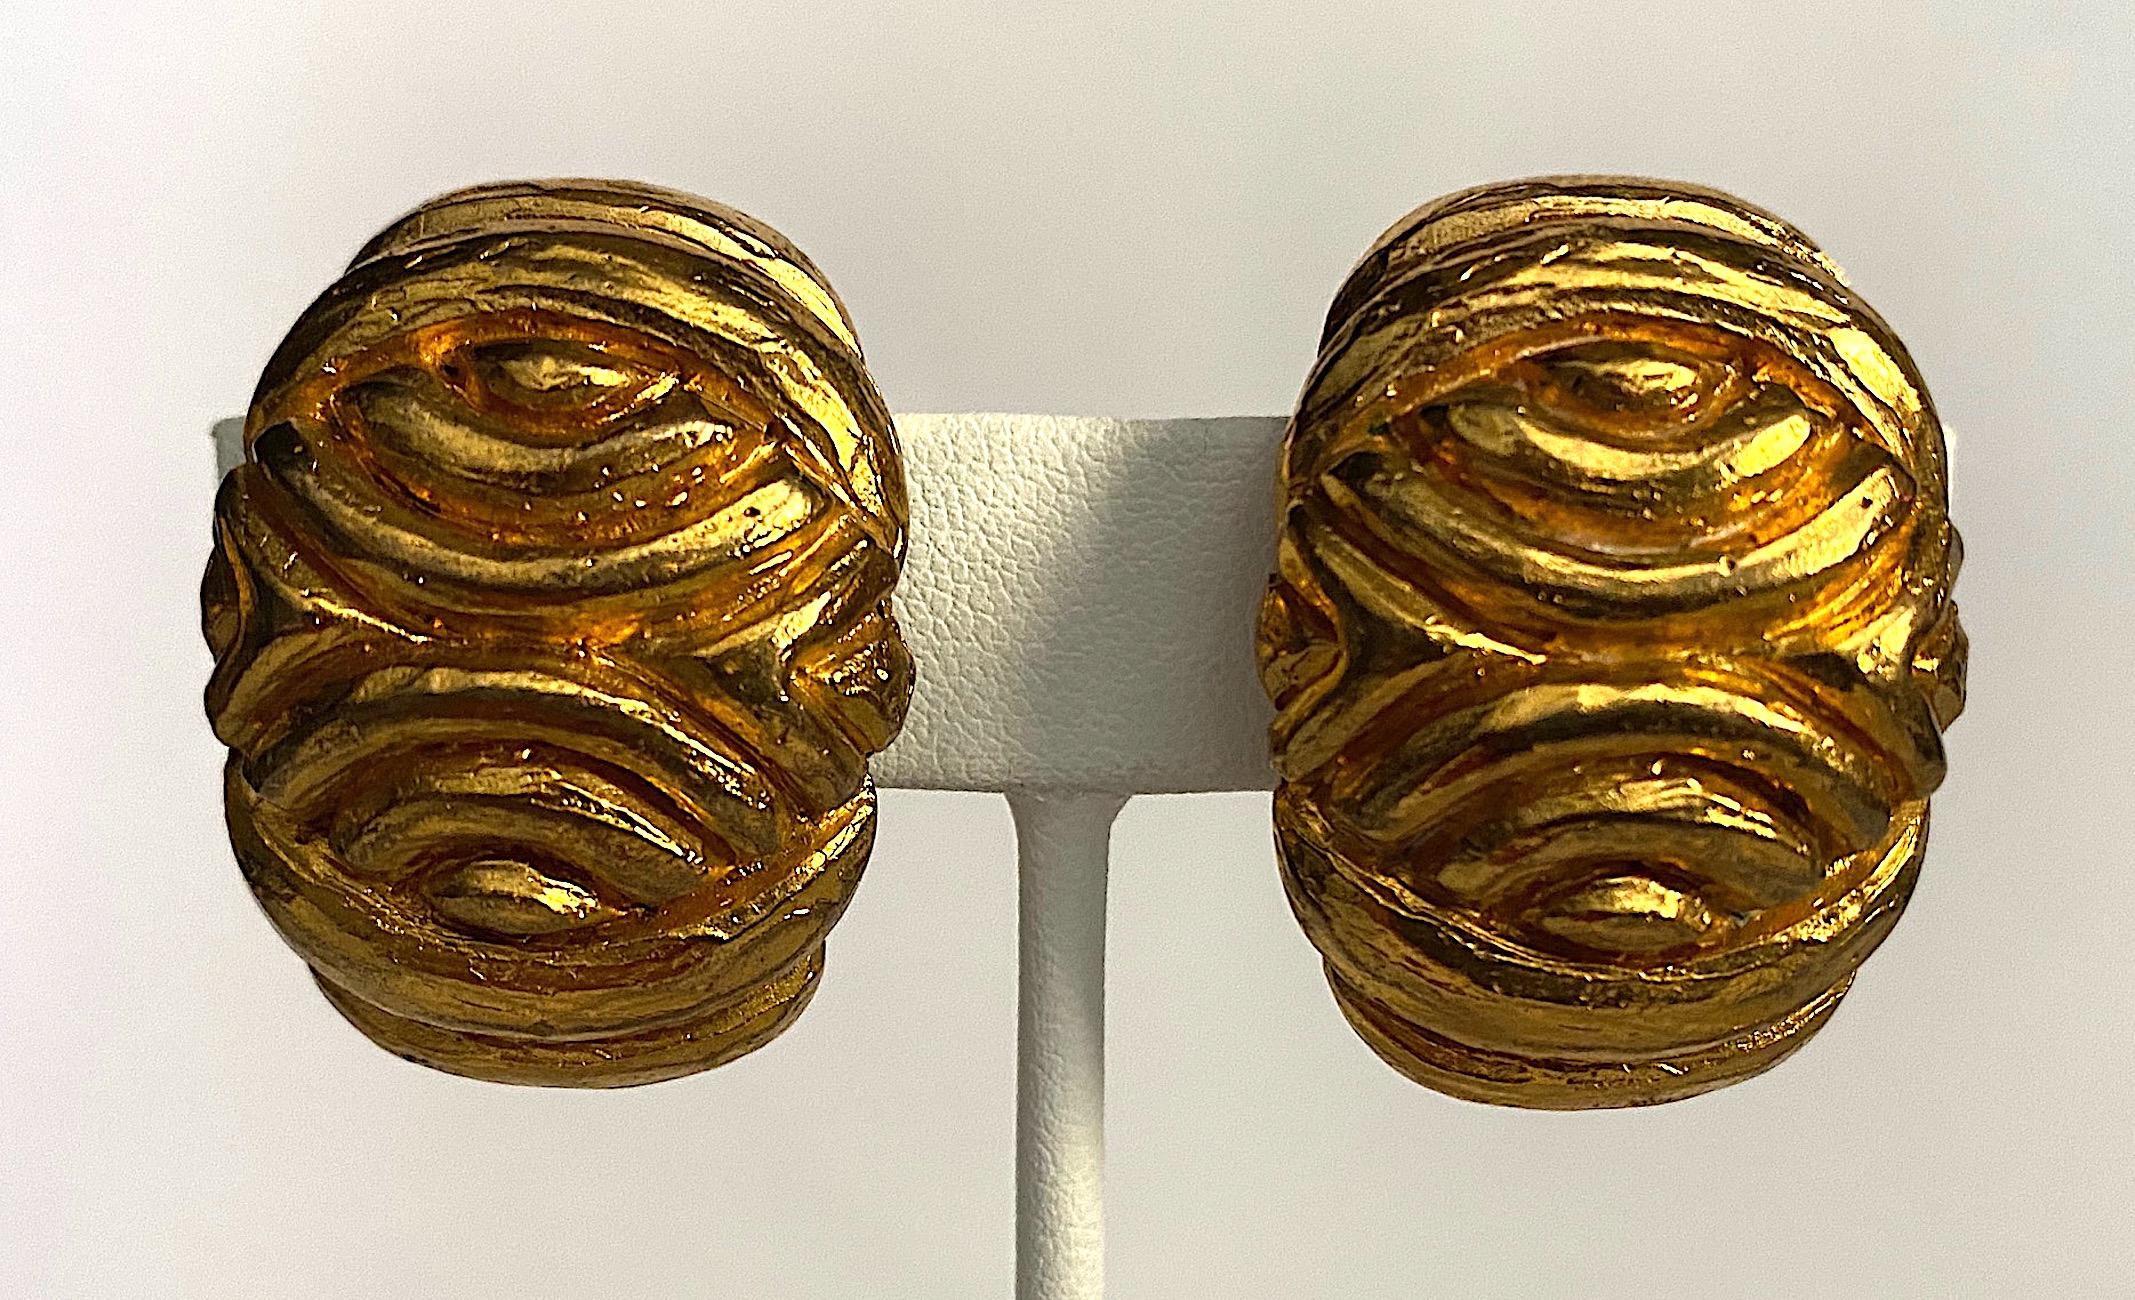 An elegant and sculptural pair of gold plate earrings by Italian fashion jewelry company Vogue Bijoux from the 1980s. The oval shape earrings are carefully cast with a carved abstract design. They are lightly domed and curved. Each measures .94 of